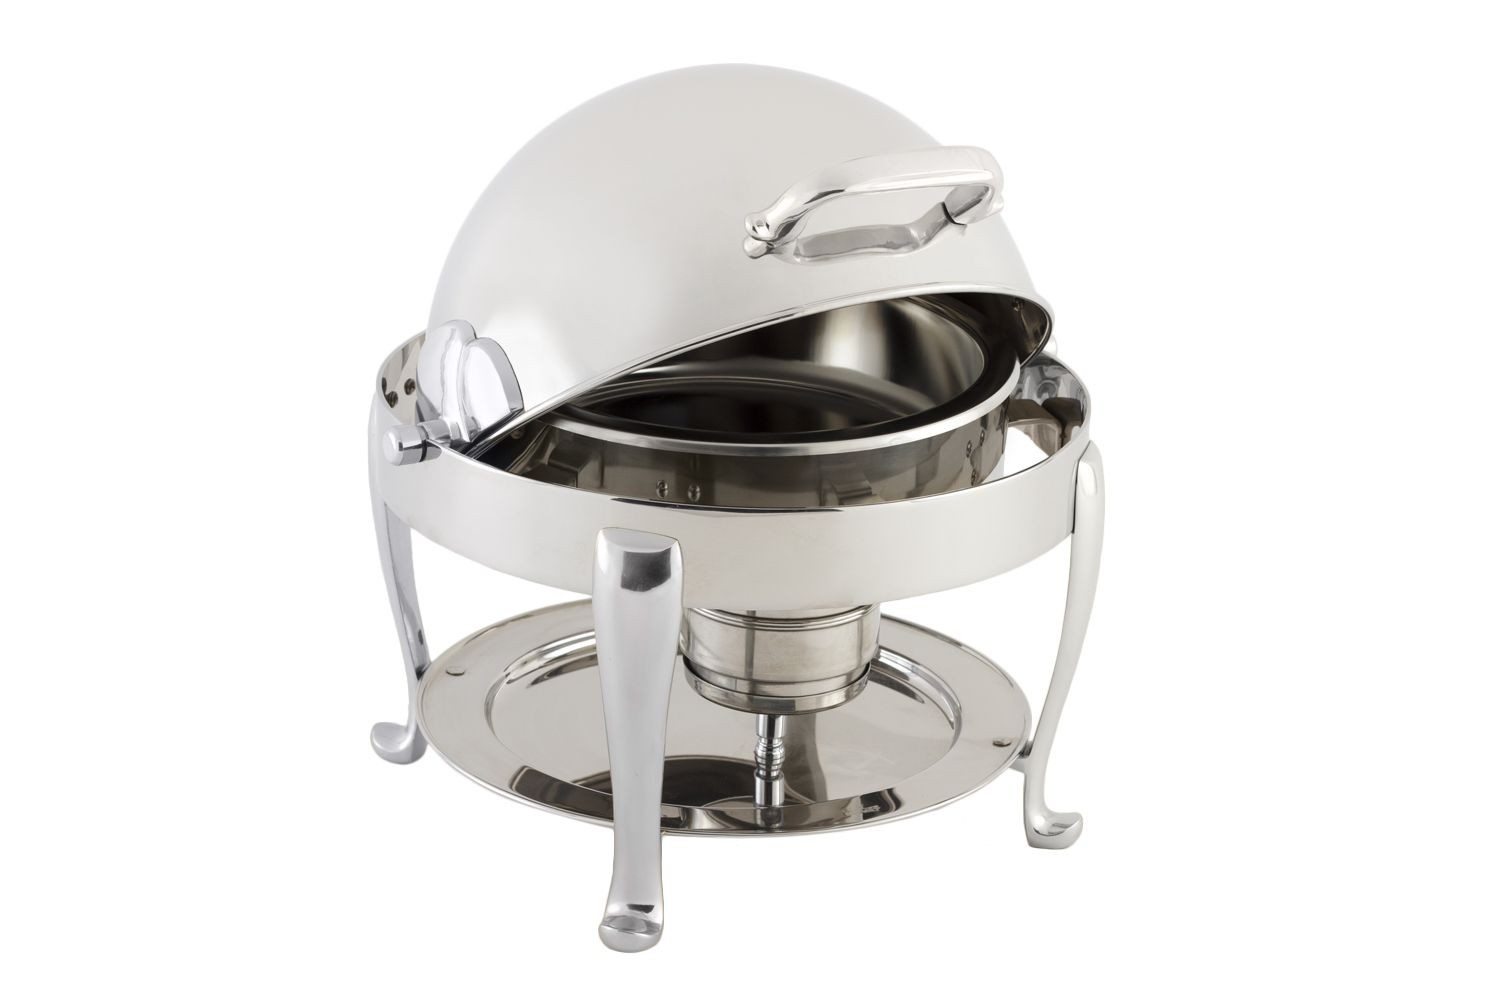 Bon Chef 19014CH Petite Dripless Round Chafer with Chrome Accents and Roman Legs, 3 Qt.